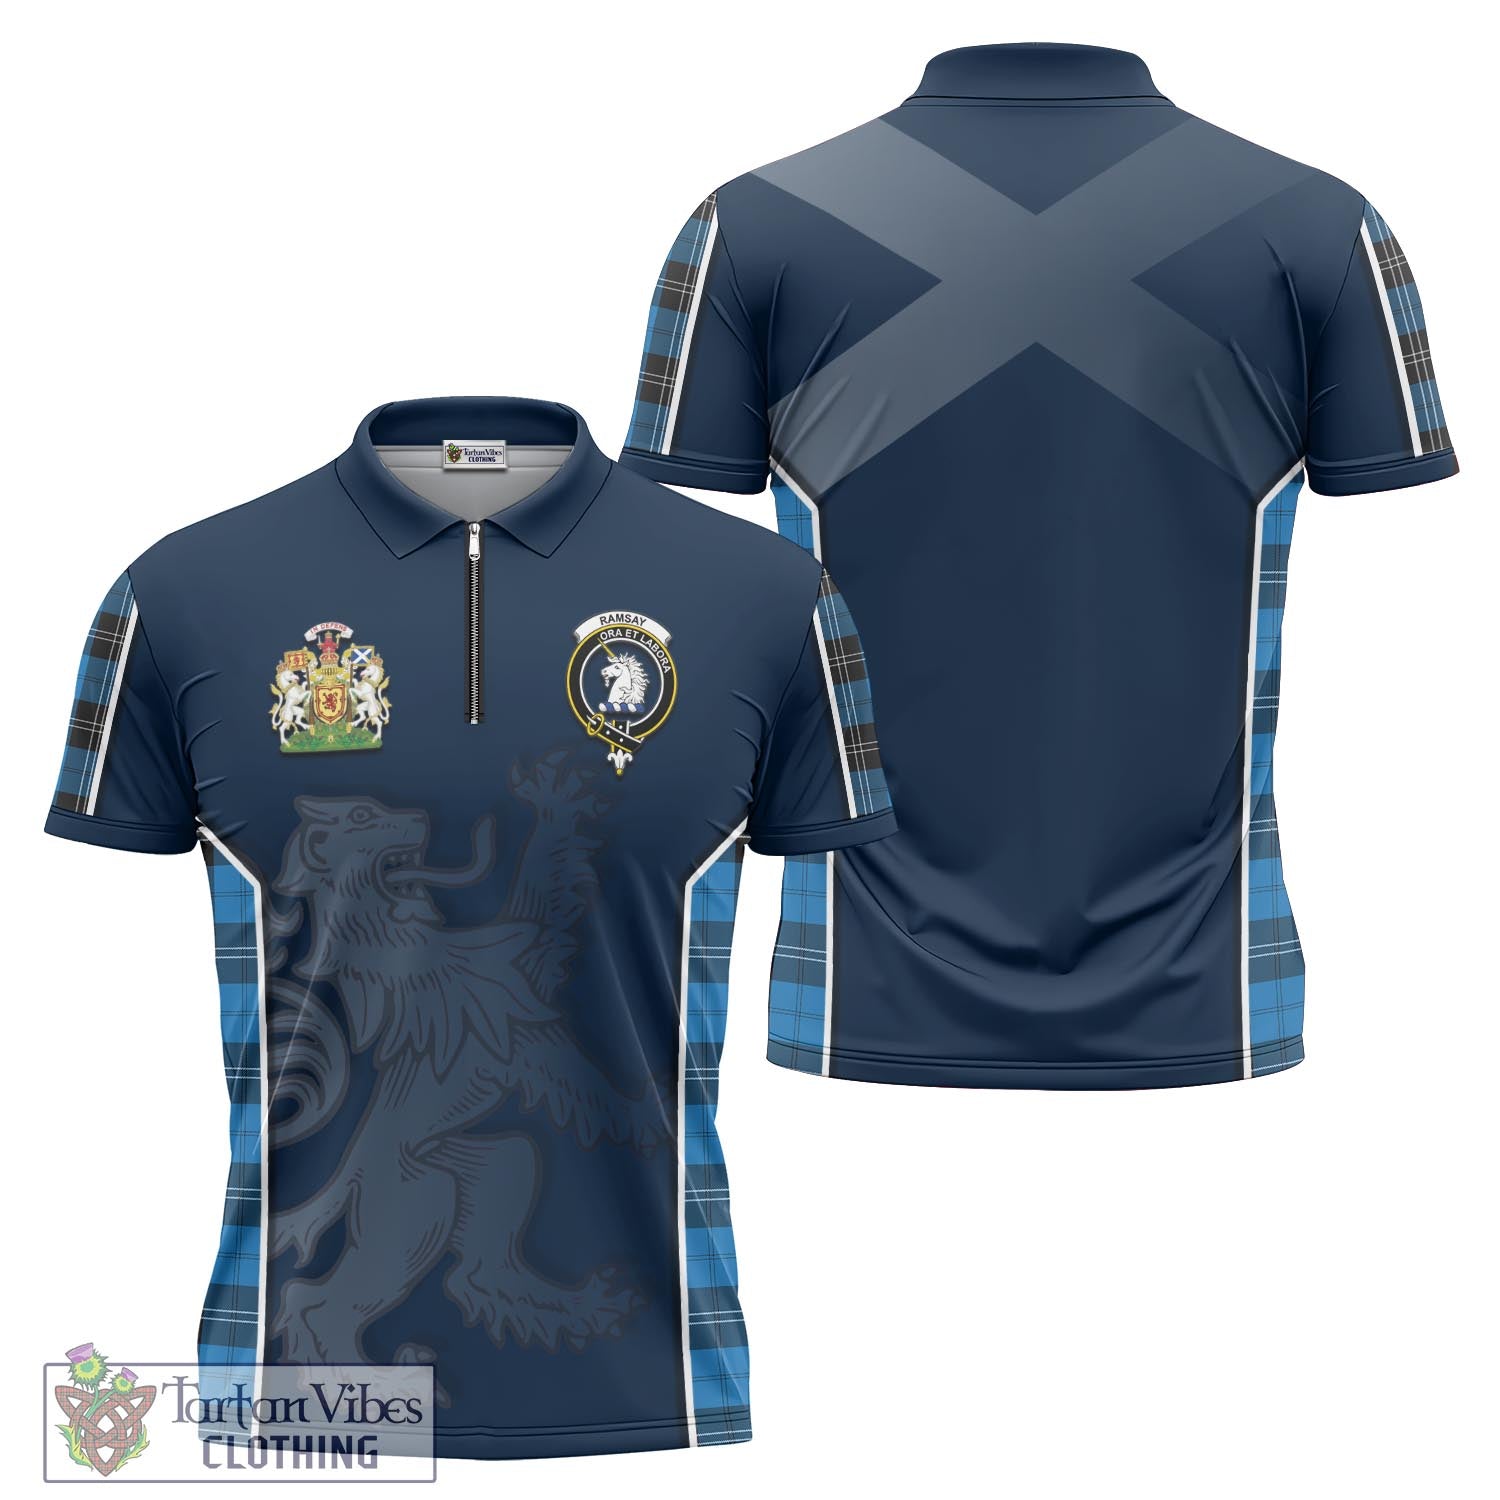 Tartan Vibes Clothing Ramsay Blue Ancient Tartan Zipper Polo Shirt with Family Crest and Lion Rampant Vibes Sport Style